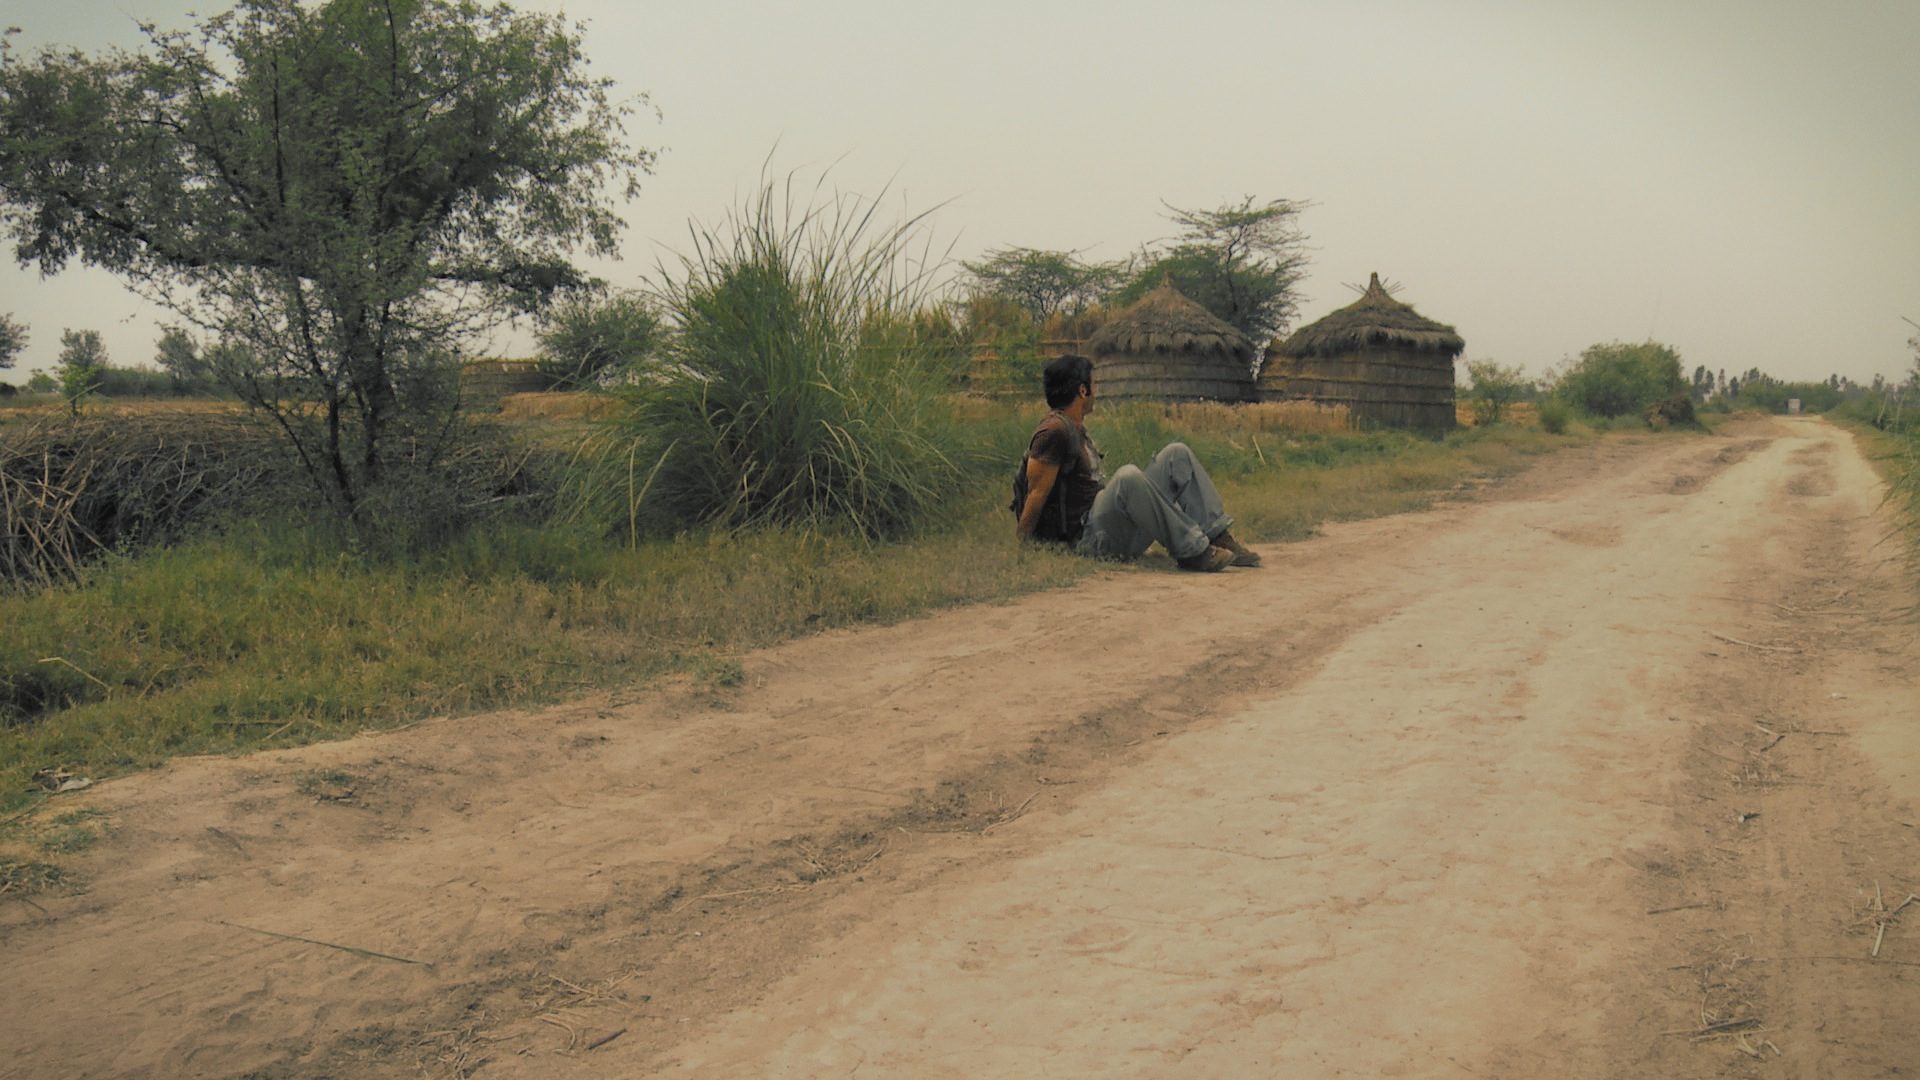 Sean Fletcher (Armand Gachet) sits at the side of the rural path in the fields by Javat, India. A still from a multi-award winning film "reconnection"